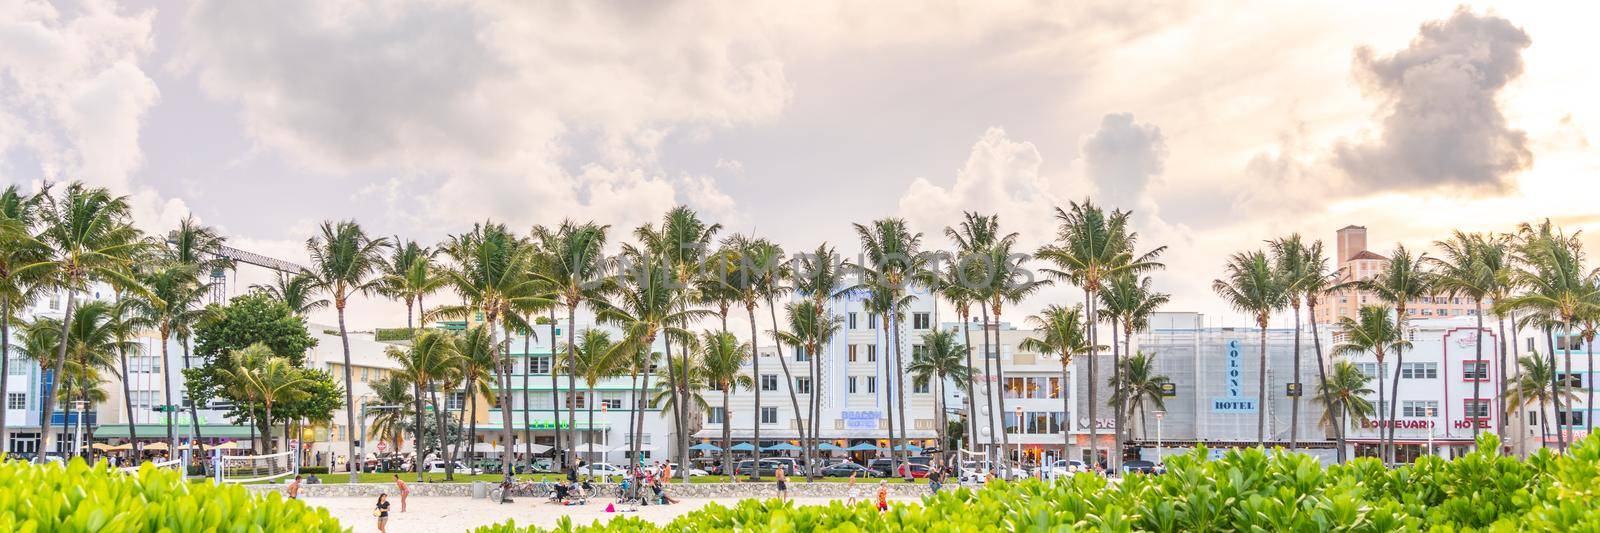 MIAMI BEACH, FLORIDA USA - September 10, 2019: Panorama of Ocean Drive in Miami Beach, famous travel destination for beautiful beaches, water, Art Deco historic architecture and nightlife by Mariakray